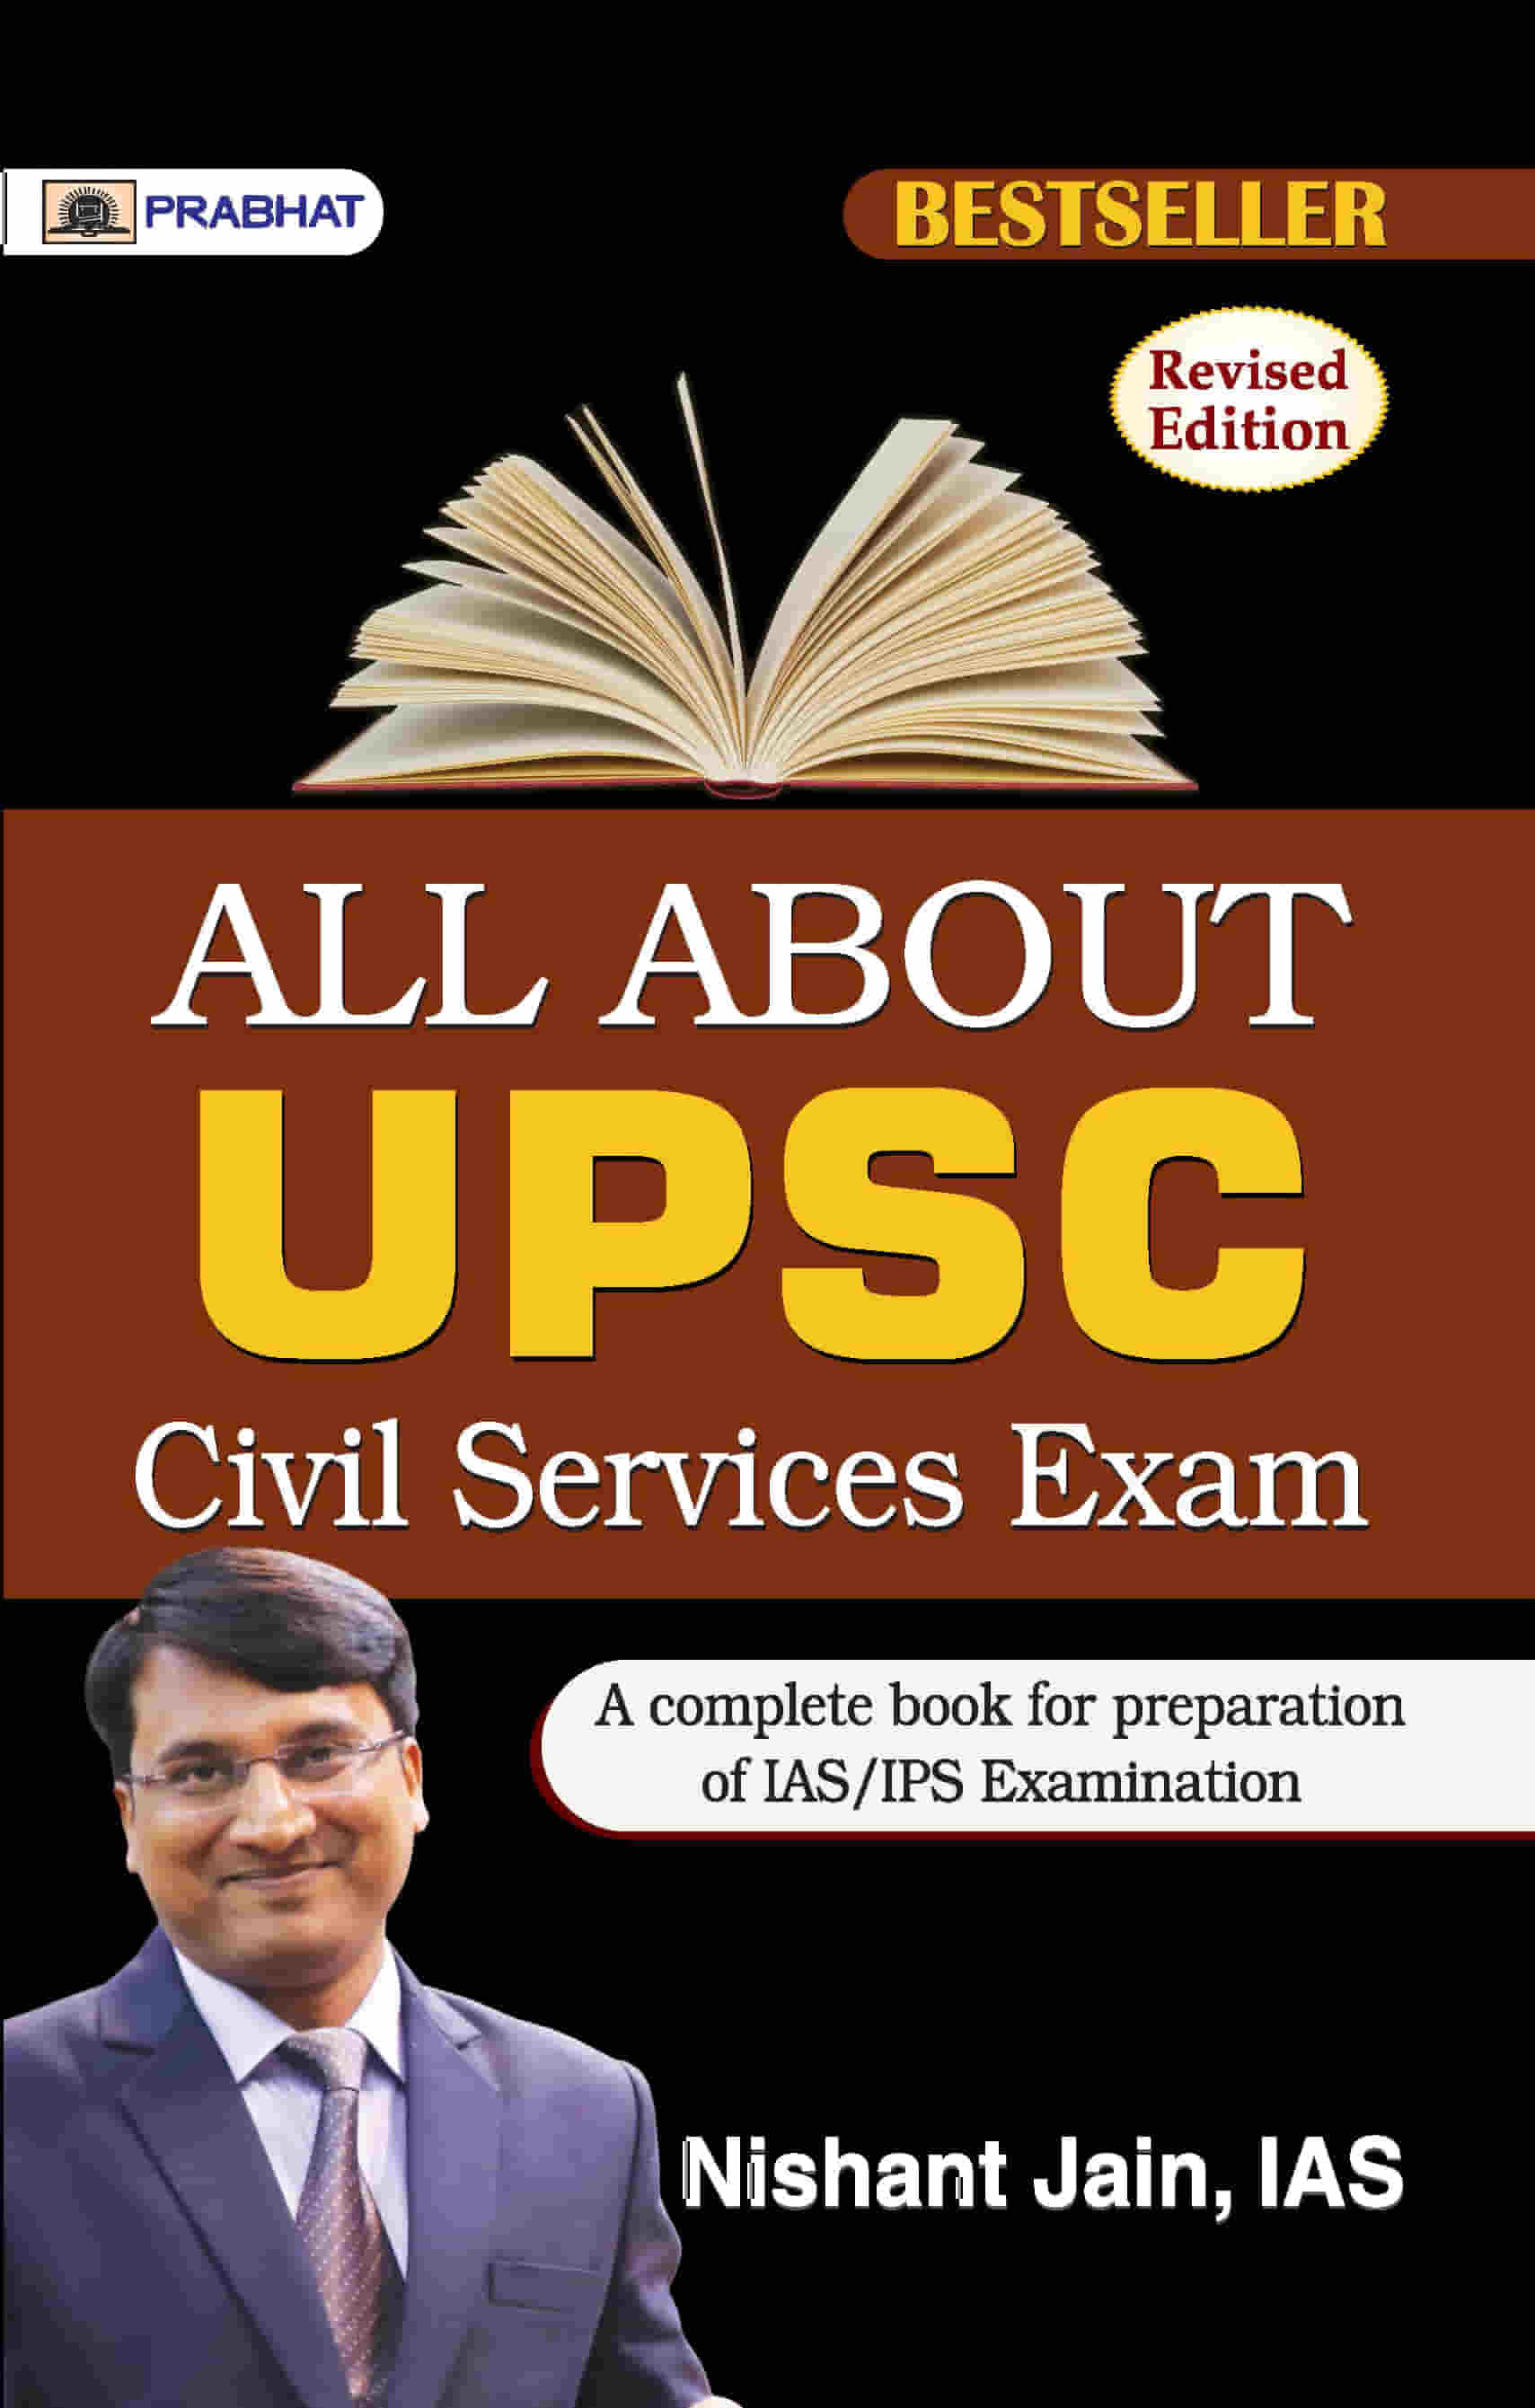 All About UPSC Civil Services Exam 